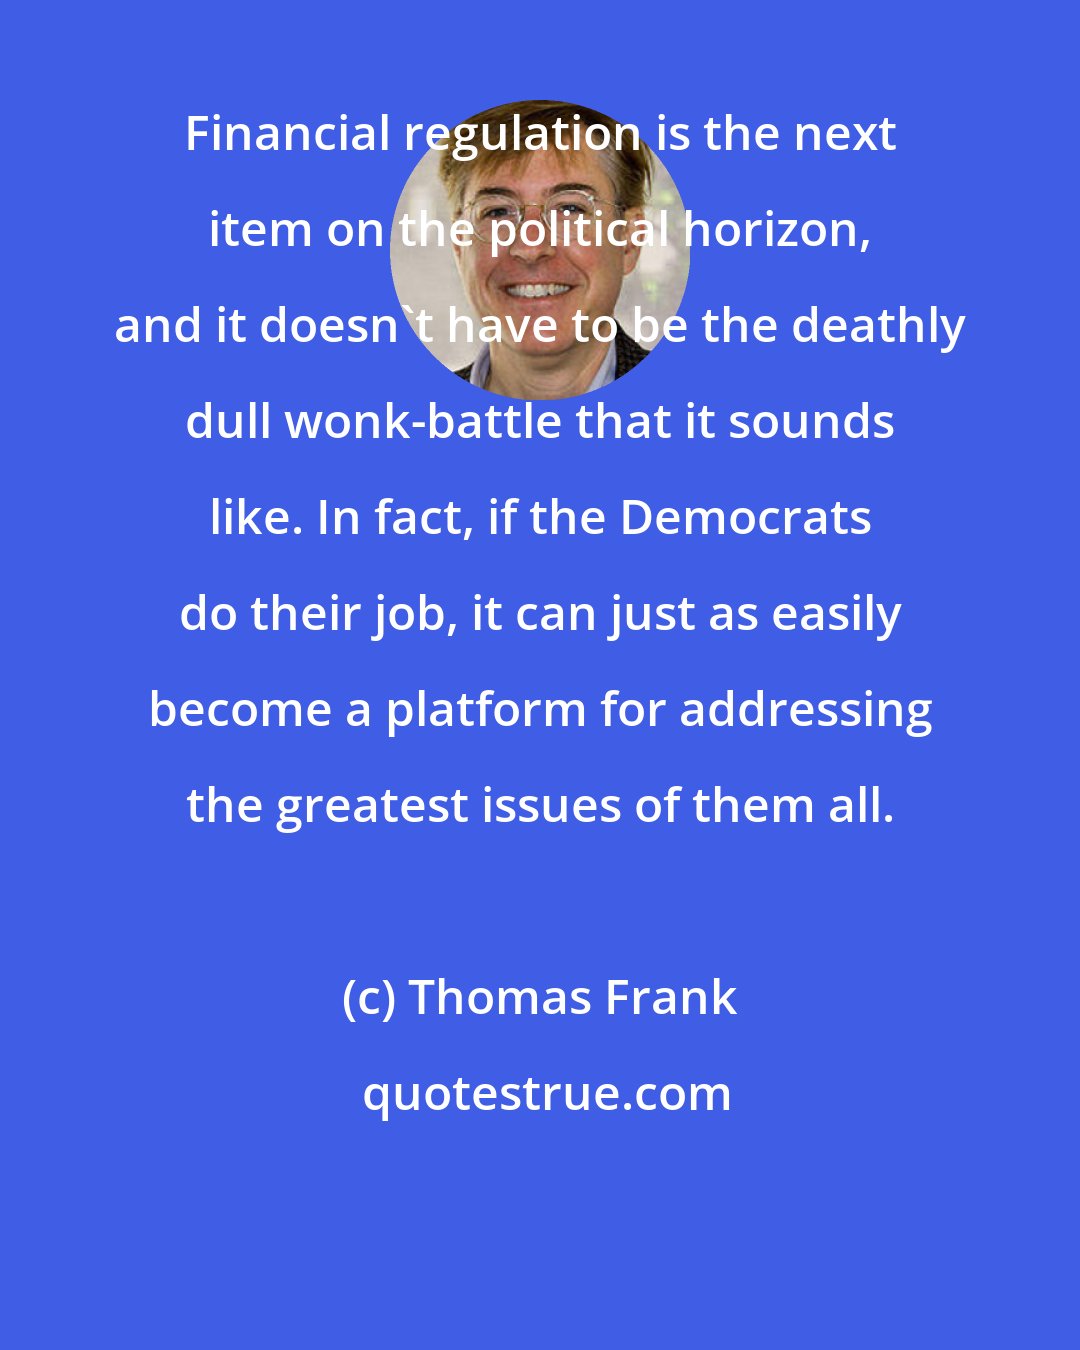 Thomas Frank: Financial regulation is the next item on the political horizon, and it doesn't have to be the deathly dull wonk-battle that it sounds like. In fact, if the Democrats do their job, it can just as easily become a platform for addressing the greatest issues of them all.